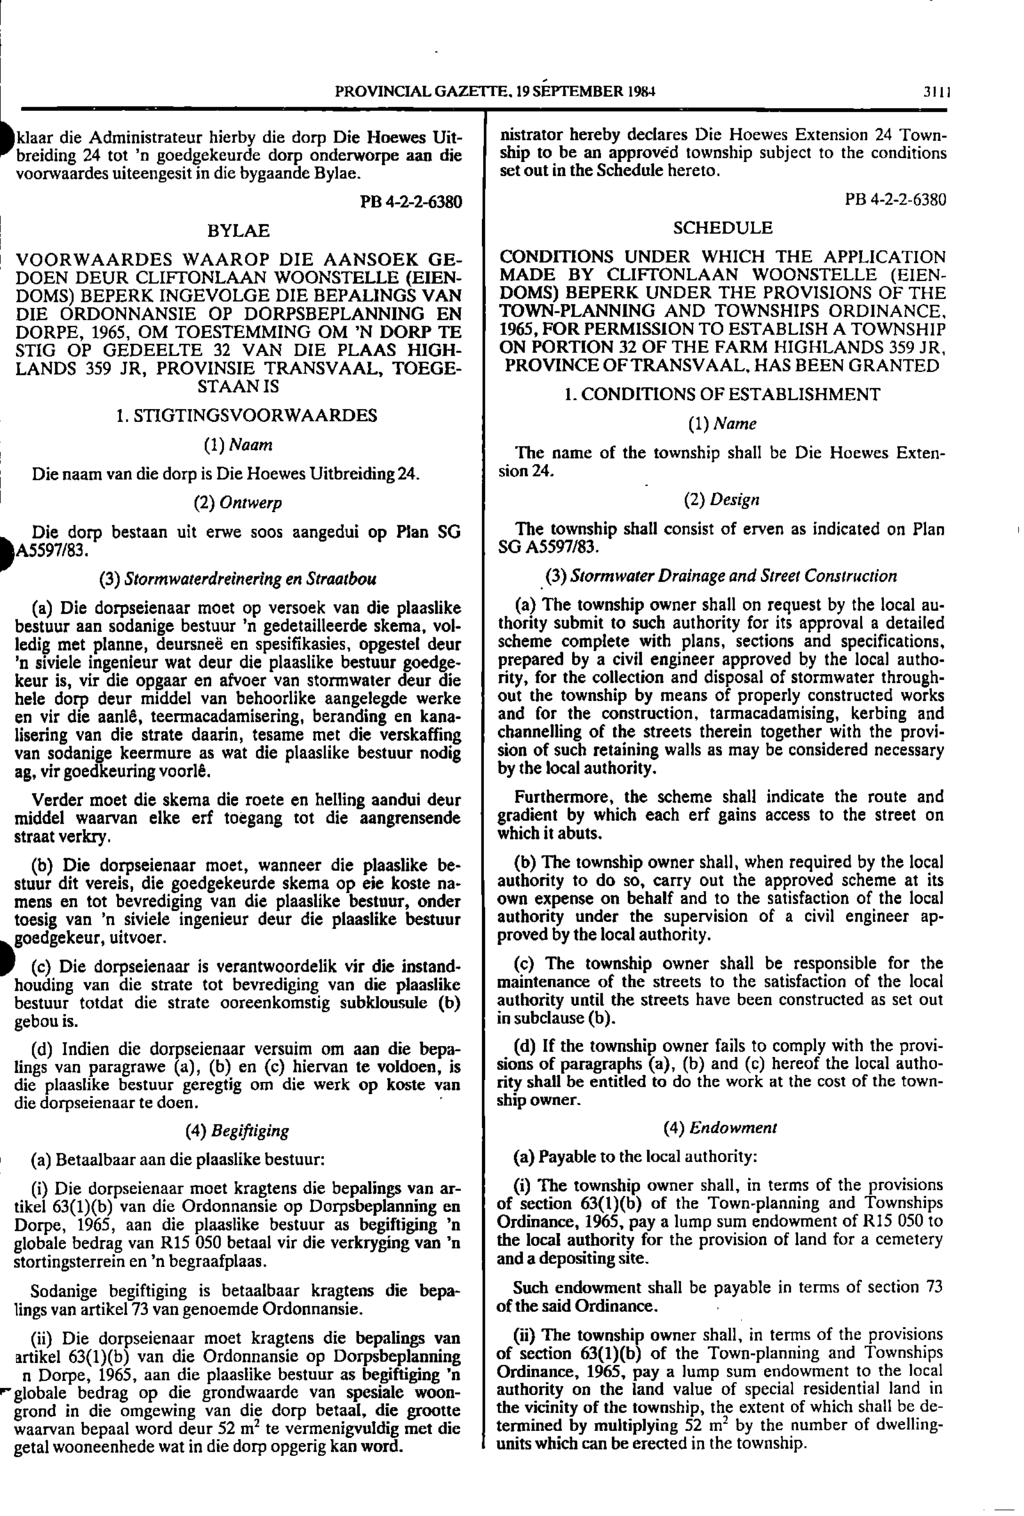 , I.. GAZETTE. 19 SEPTEMBER 198 3111 nistrator hereby declares Die Hoewes Extension 2 Town ship to be an approved township subject to the conditions set out in the Schedule hereto.